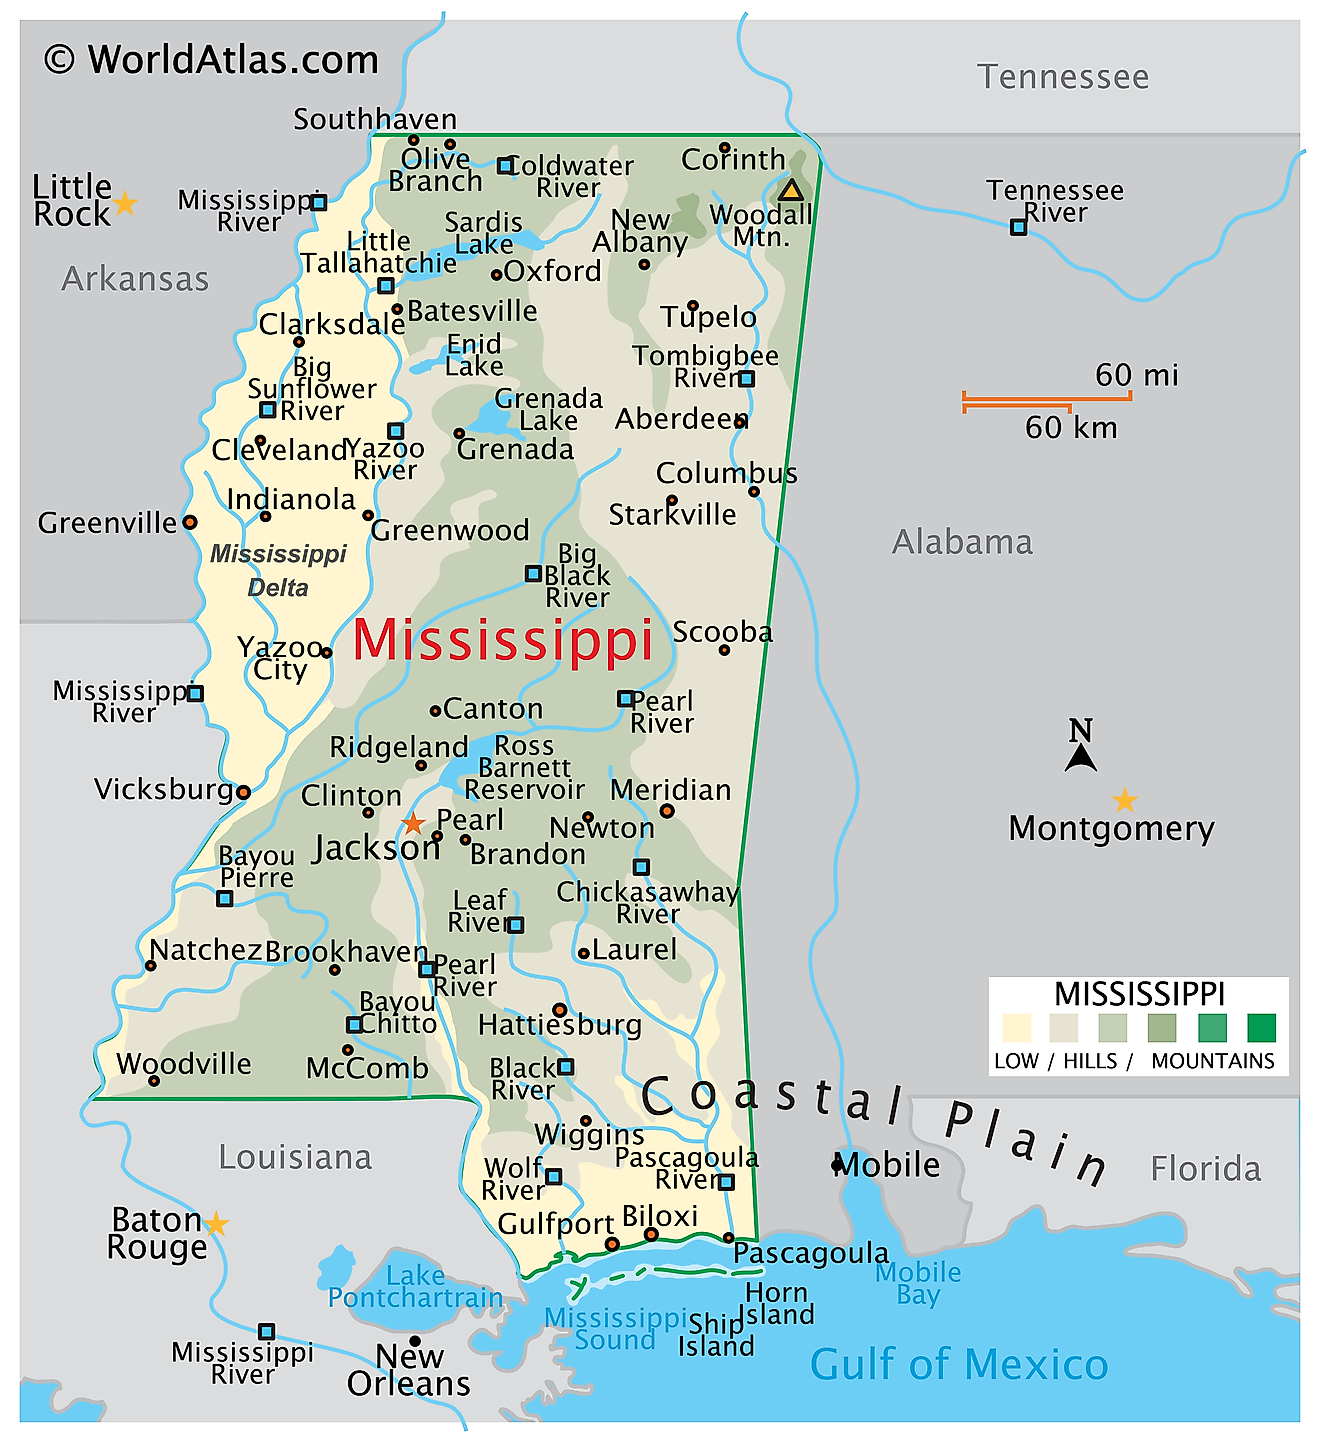 Arkansas, Louisiana and Mississippi, Road and Tourist Map, America.